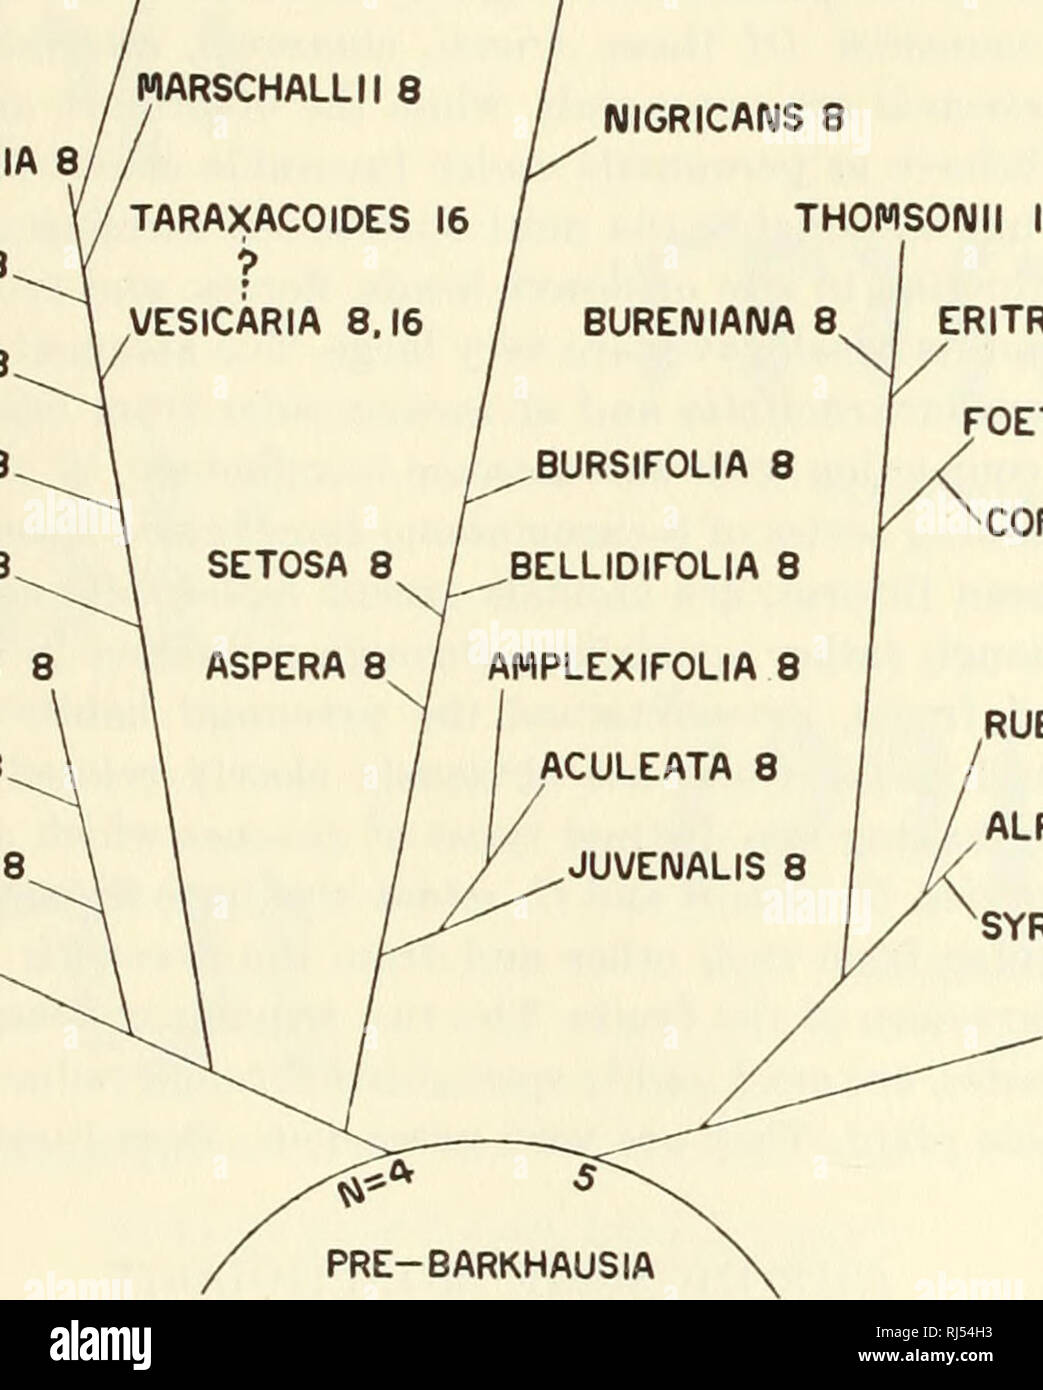 . Chromosomes and phylogeny in Crepis. II. The relationships of one hundred eight species. Crepis; Plants; Karyokinesis. 1934] Babcock-Cameron: Chromosomes and Phylogeny in Crepis. II 299 species must have hybridized with certain 4-paired species and produced through amphidiploidy the 22-paired American species and their poly- ploid relatives shown at the top of figure 4 (cf. fig. 156). Barkhausia The phylogenetic relations of thirty-two species of Barkhausia and their chromosome numbers are shown in figure 5. In general the most primi- BARKHAUSIA PHYLOGENY AND CHROMOSOME NUMBER HACKELII 16 TA Stock Photo